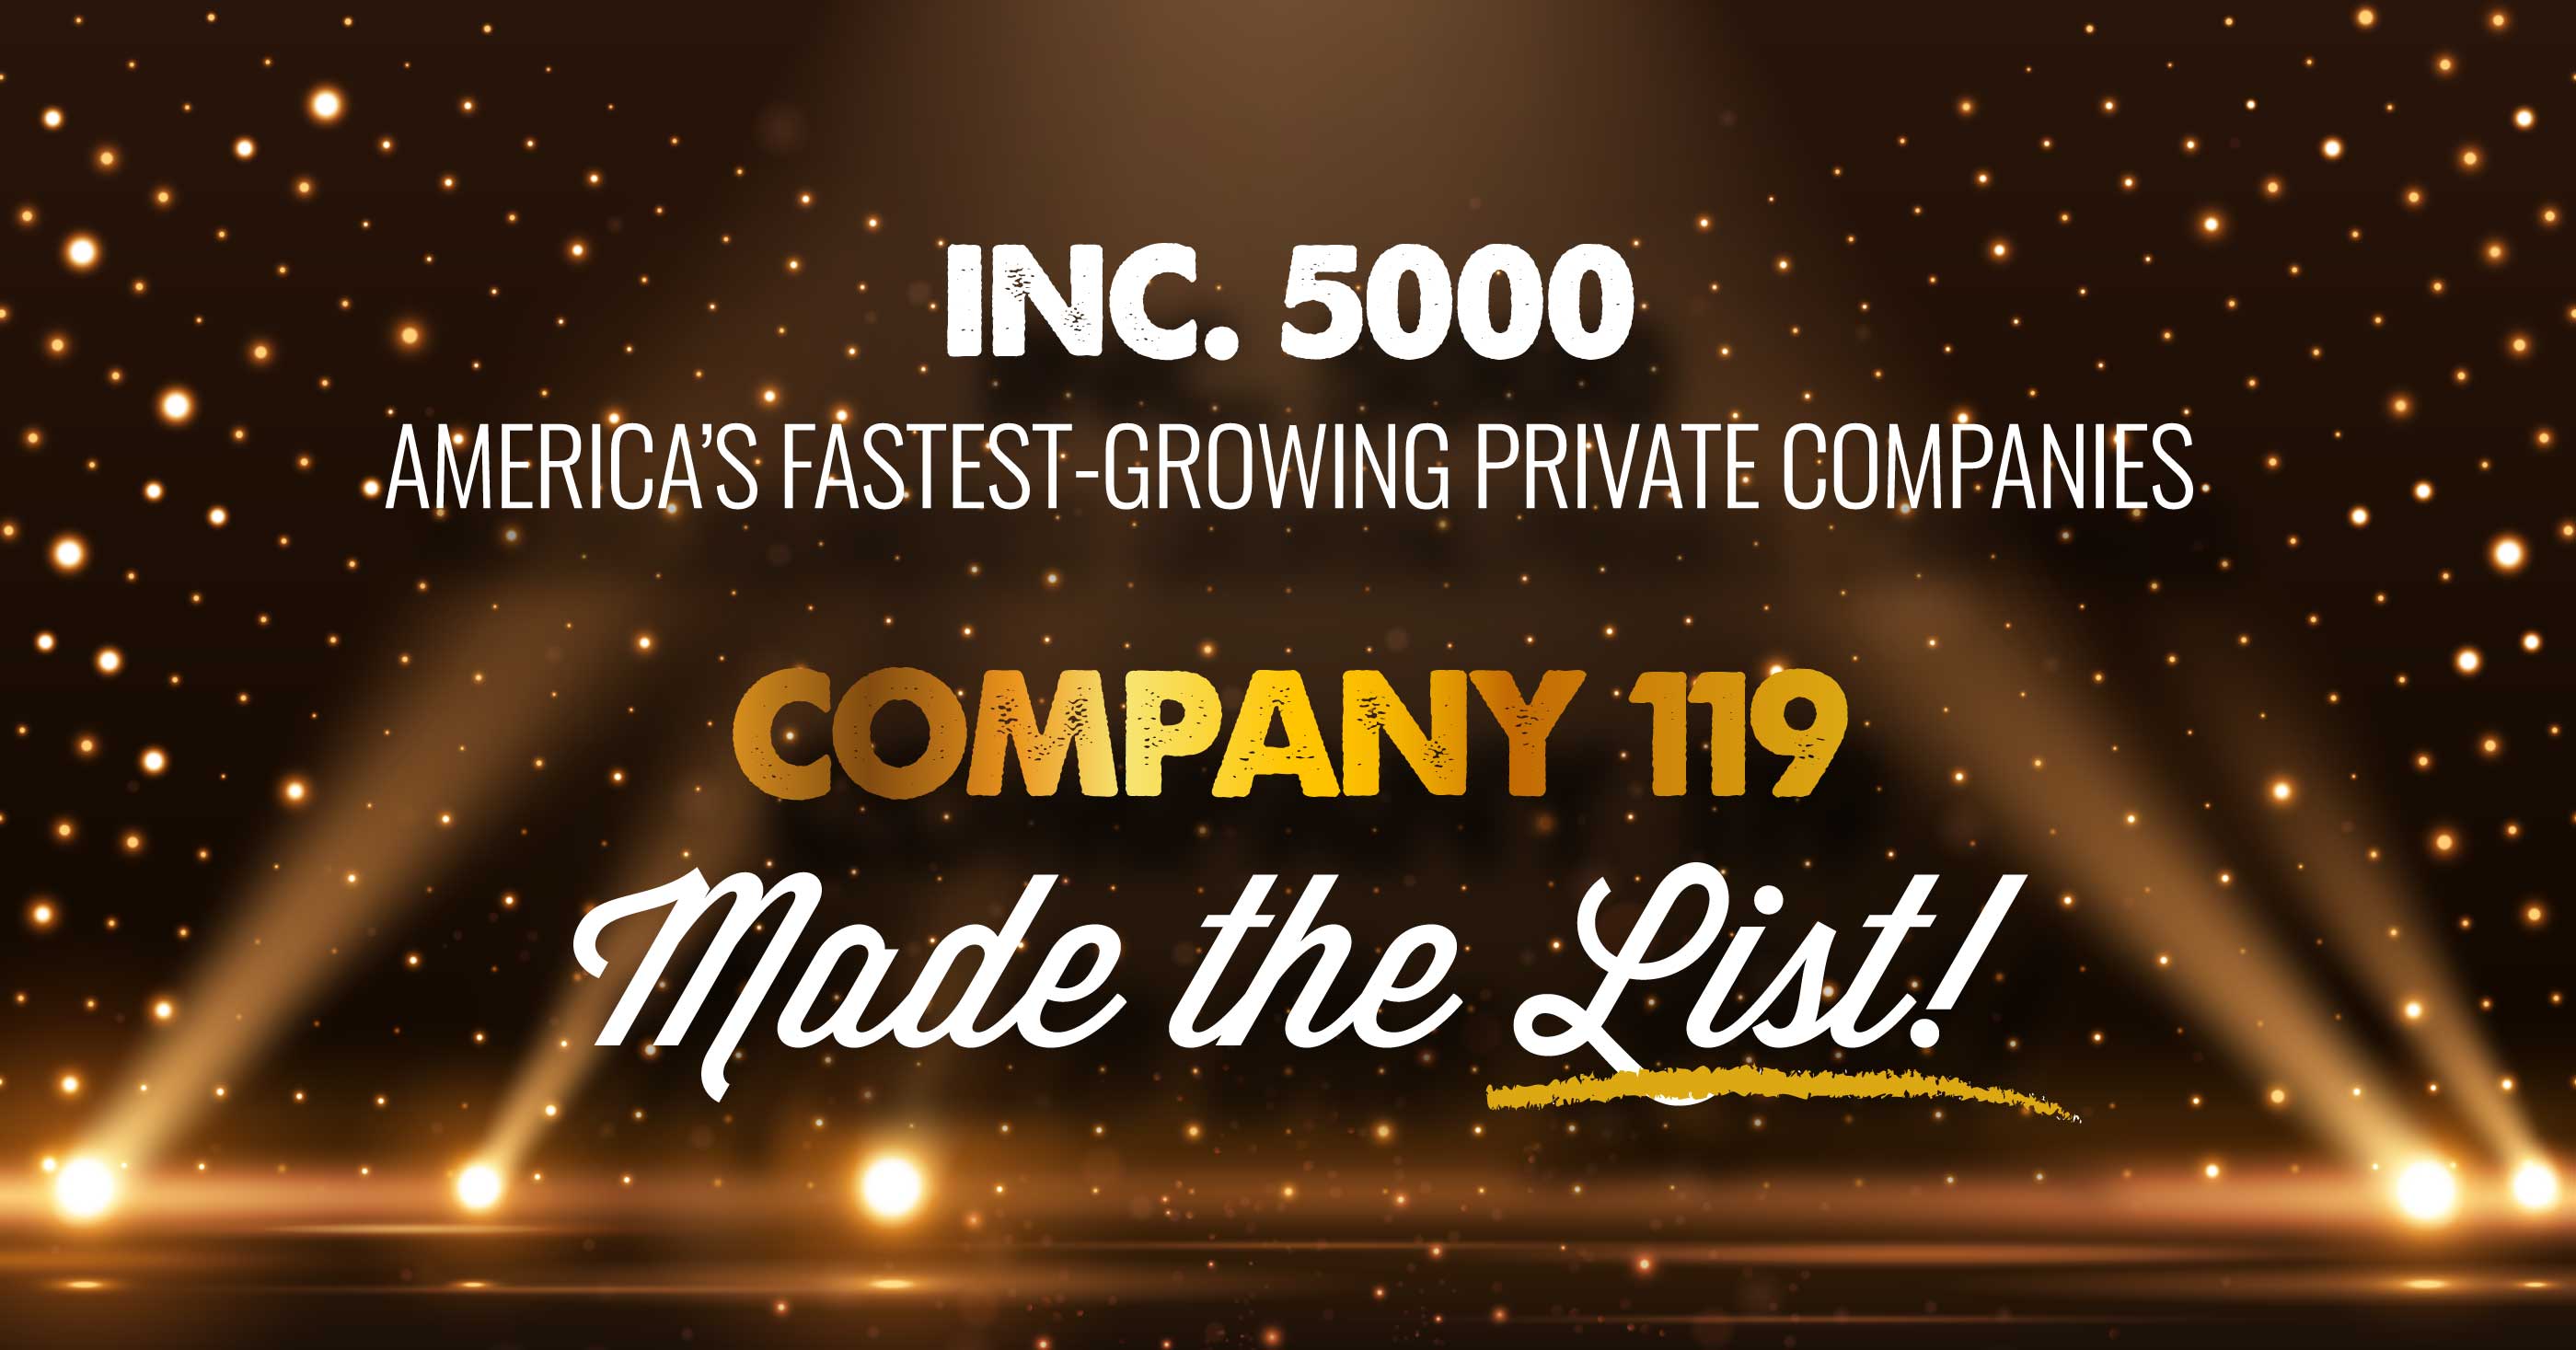 Inc. 5000 america's fastest growing private companies - company 119 made the list